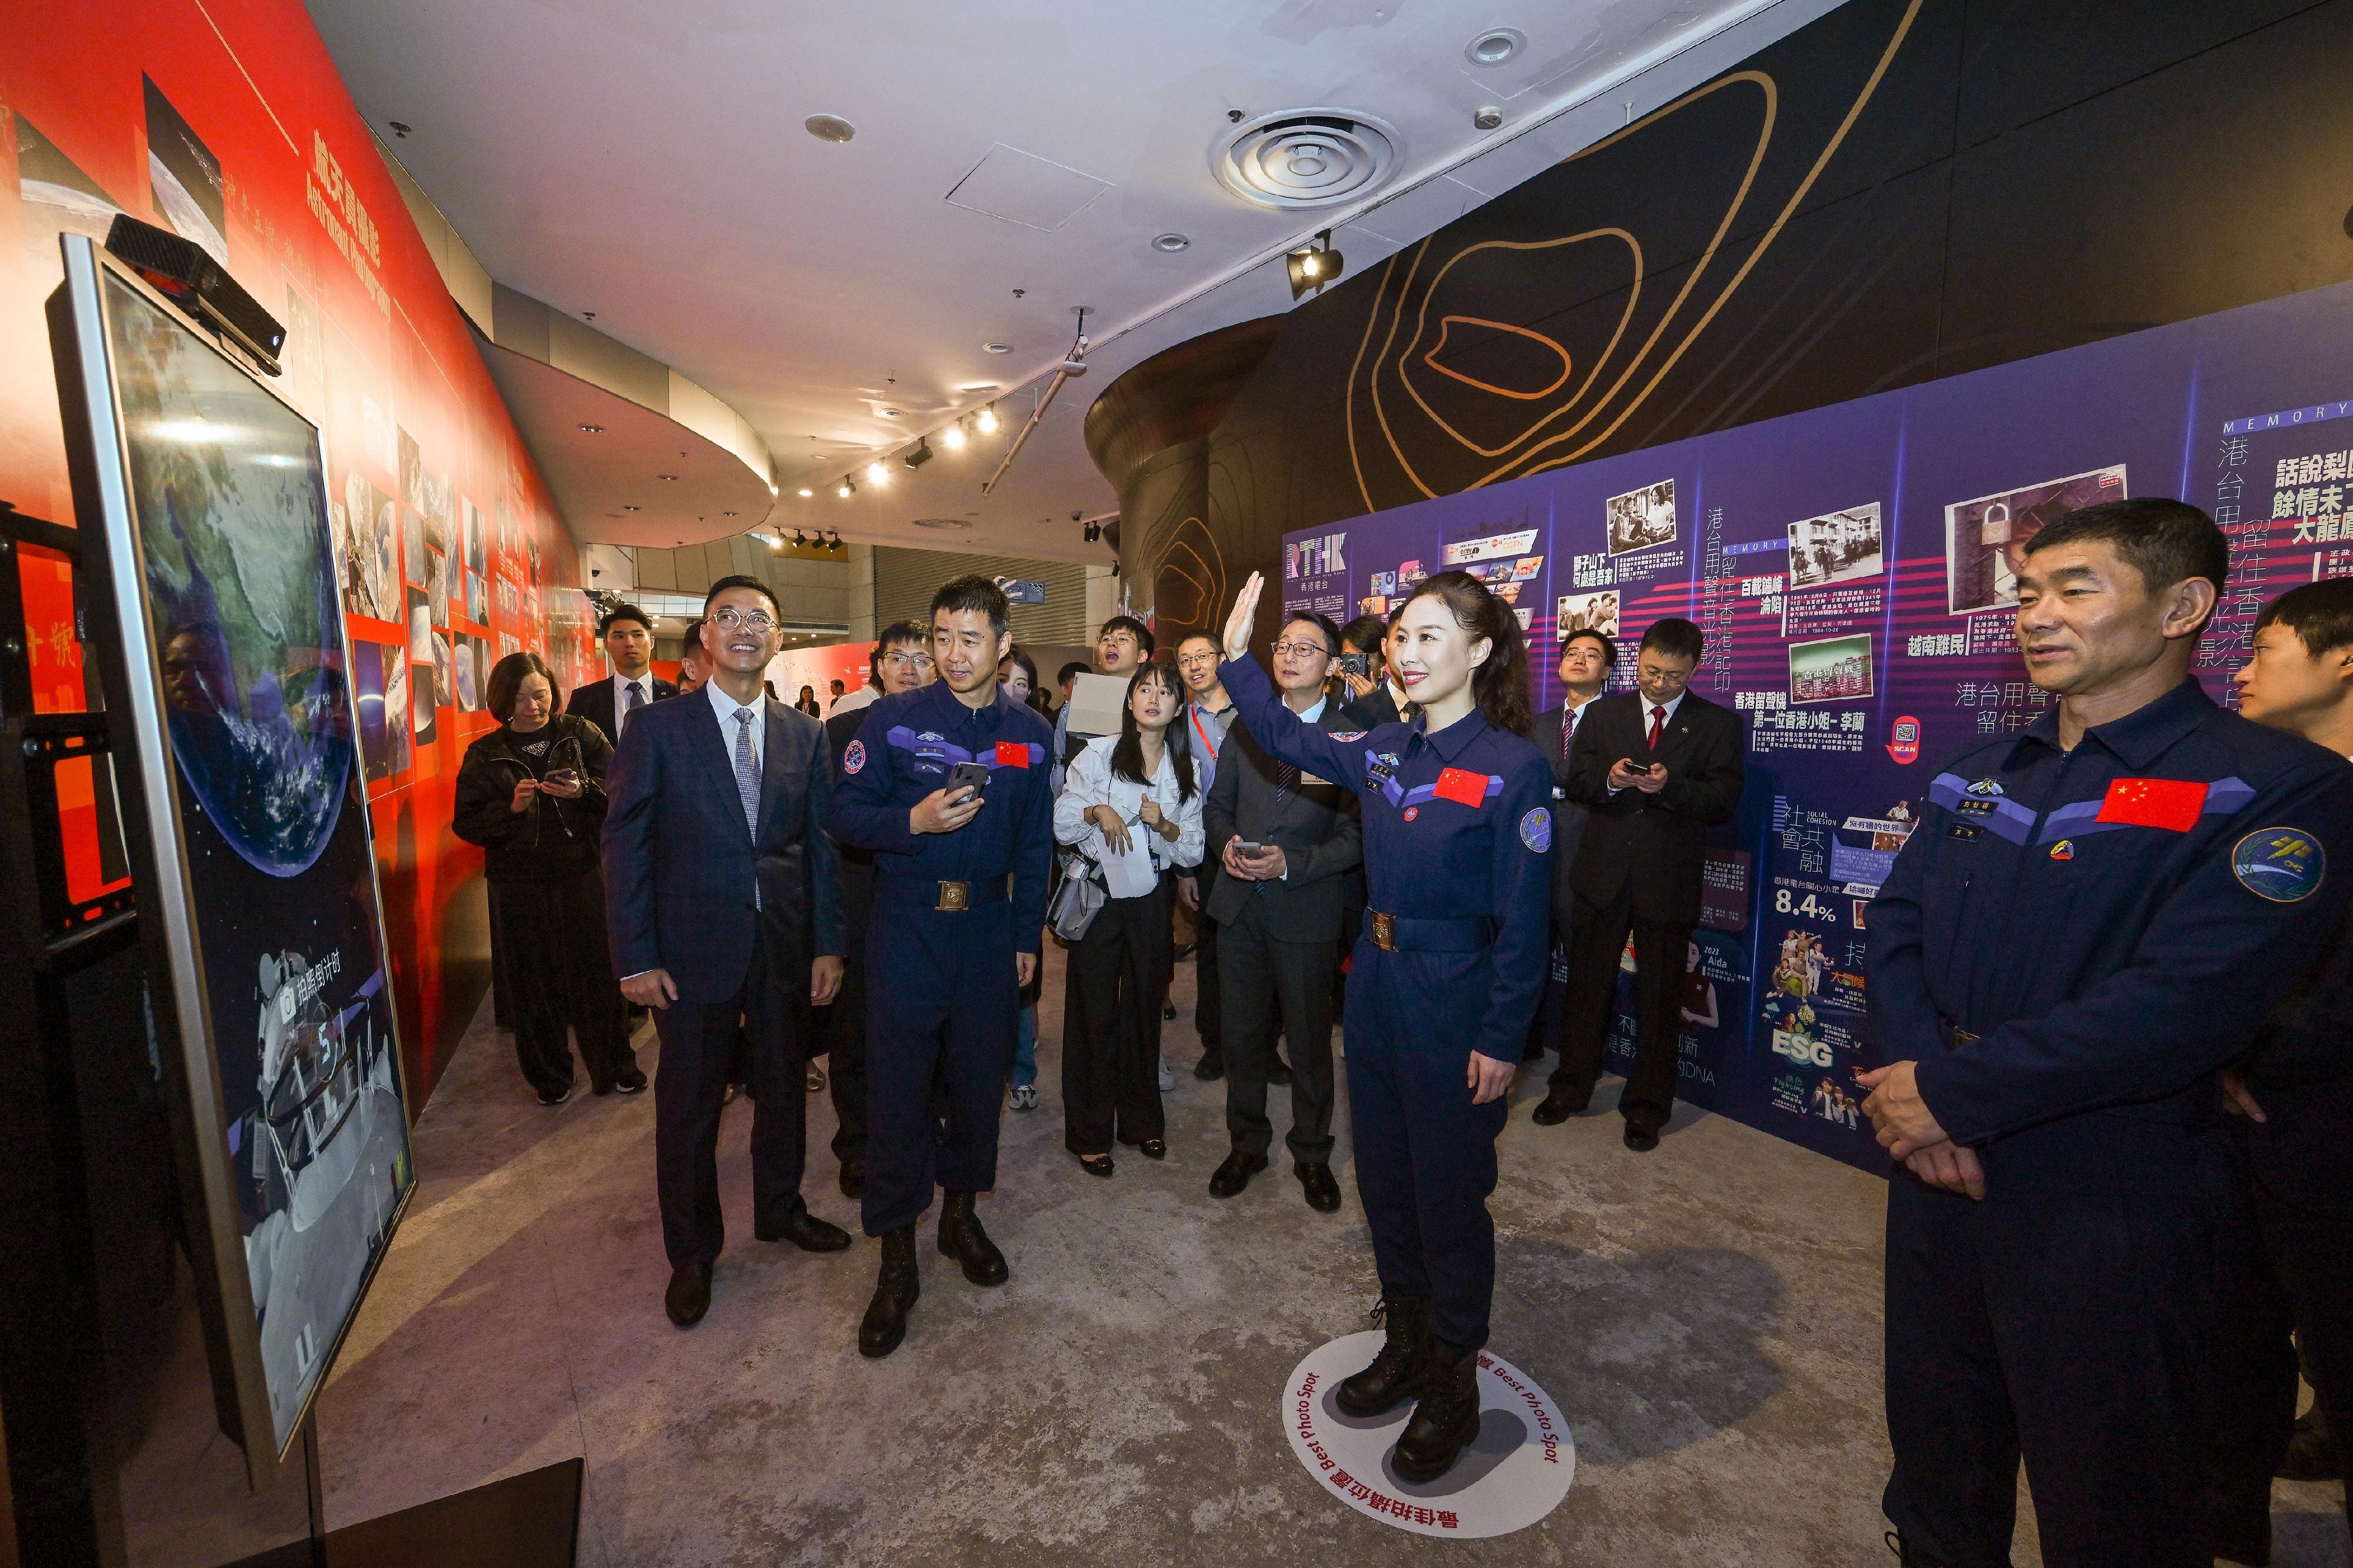 The China Manned Space delegation continued their visit to Hong Kong today (November 30). Photo shows Shenzhou-13 astronaut Ms Wang Yaping (front row, second right) experiencing an interactive exhibit at the China Manned Space Exhibition.